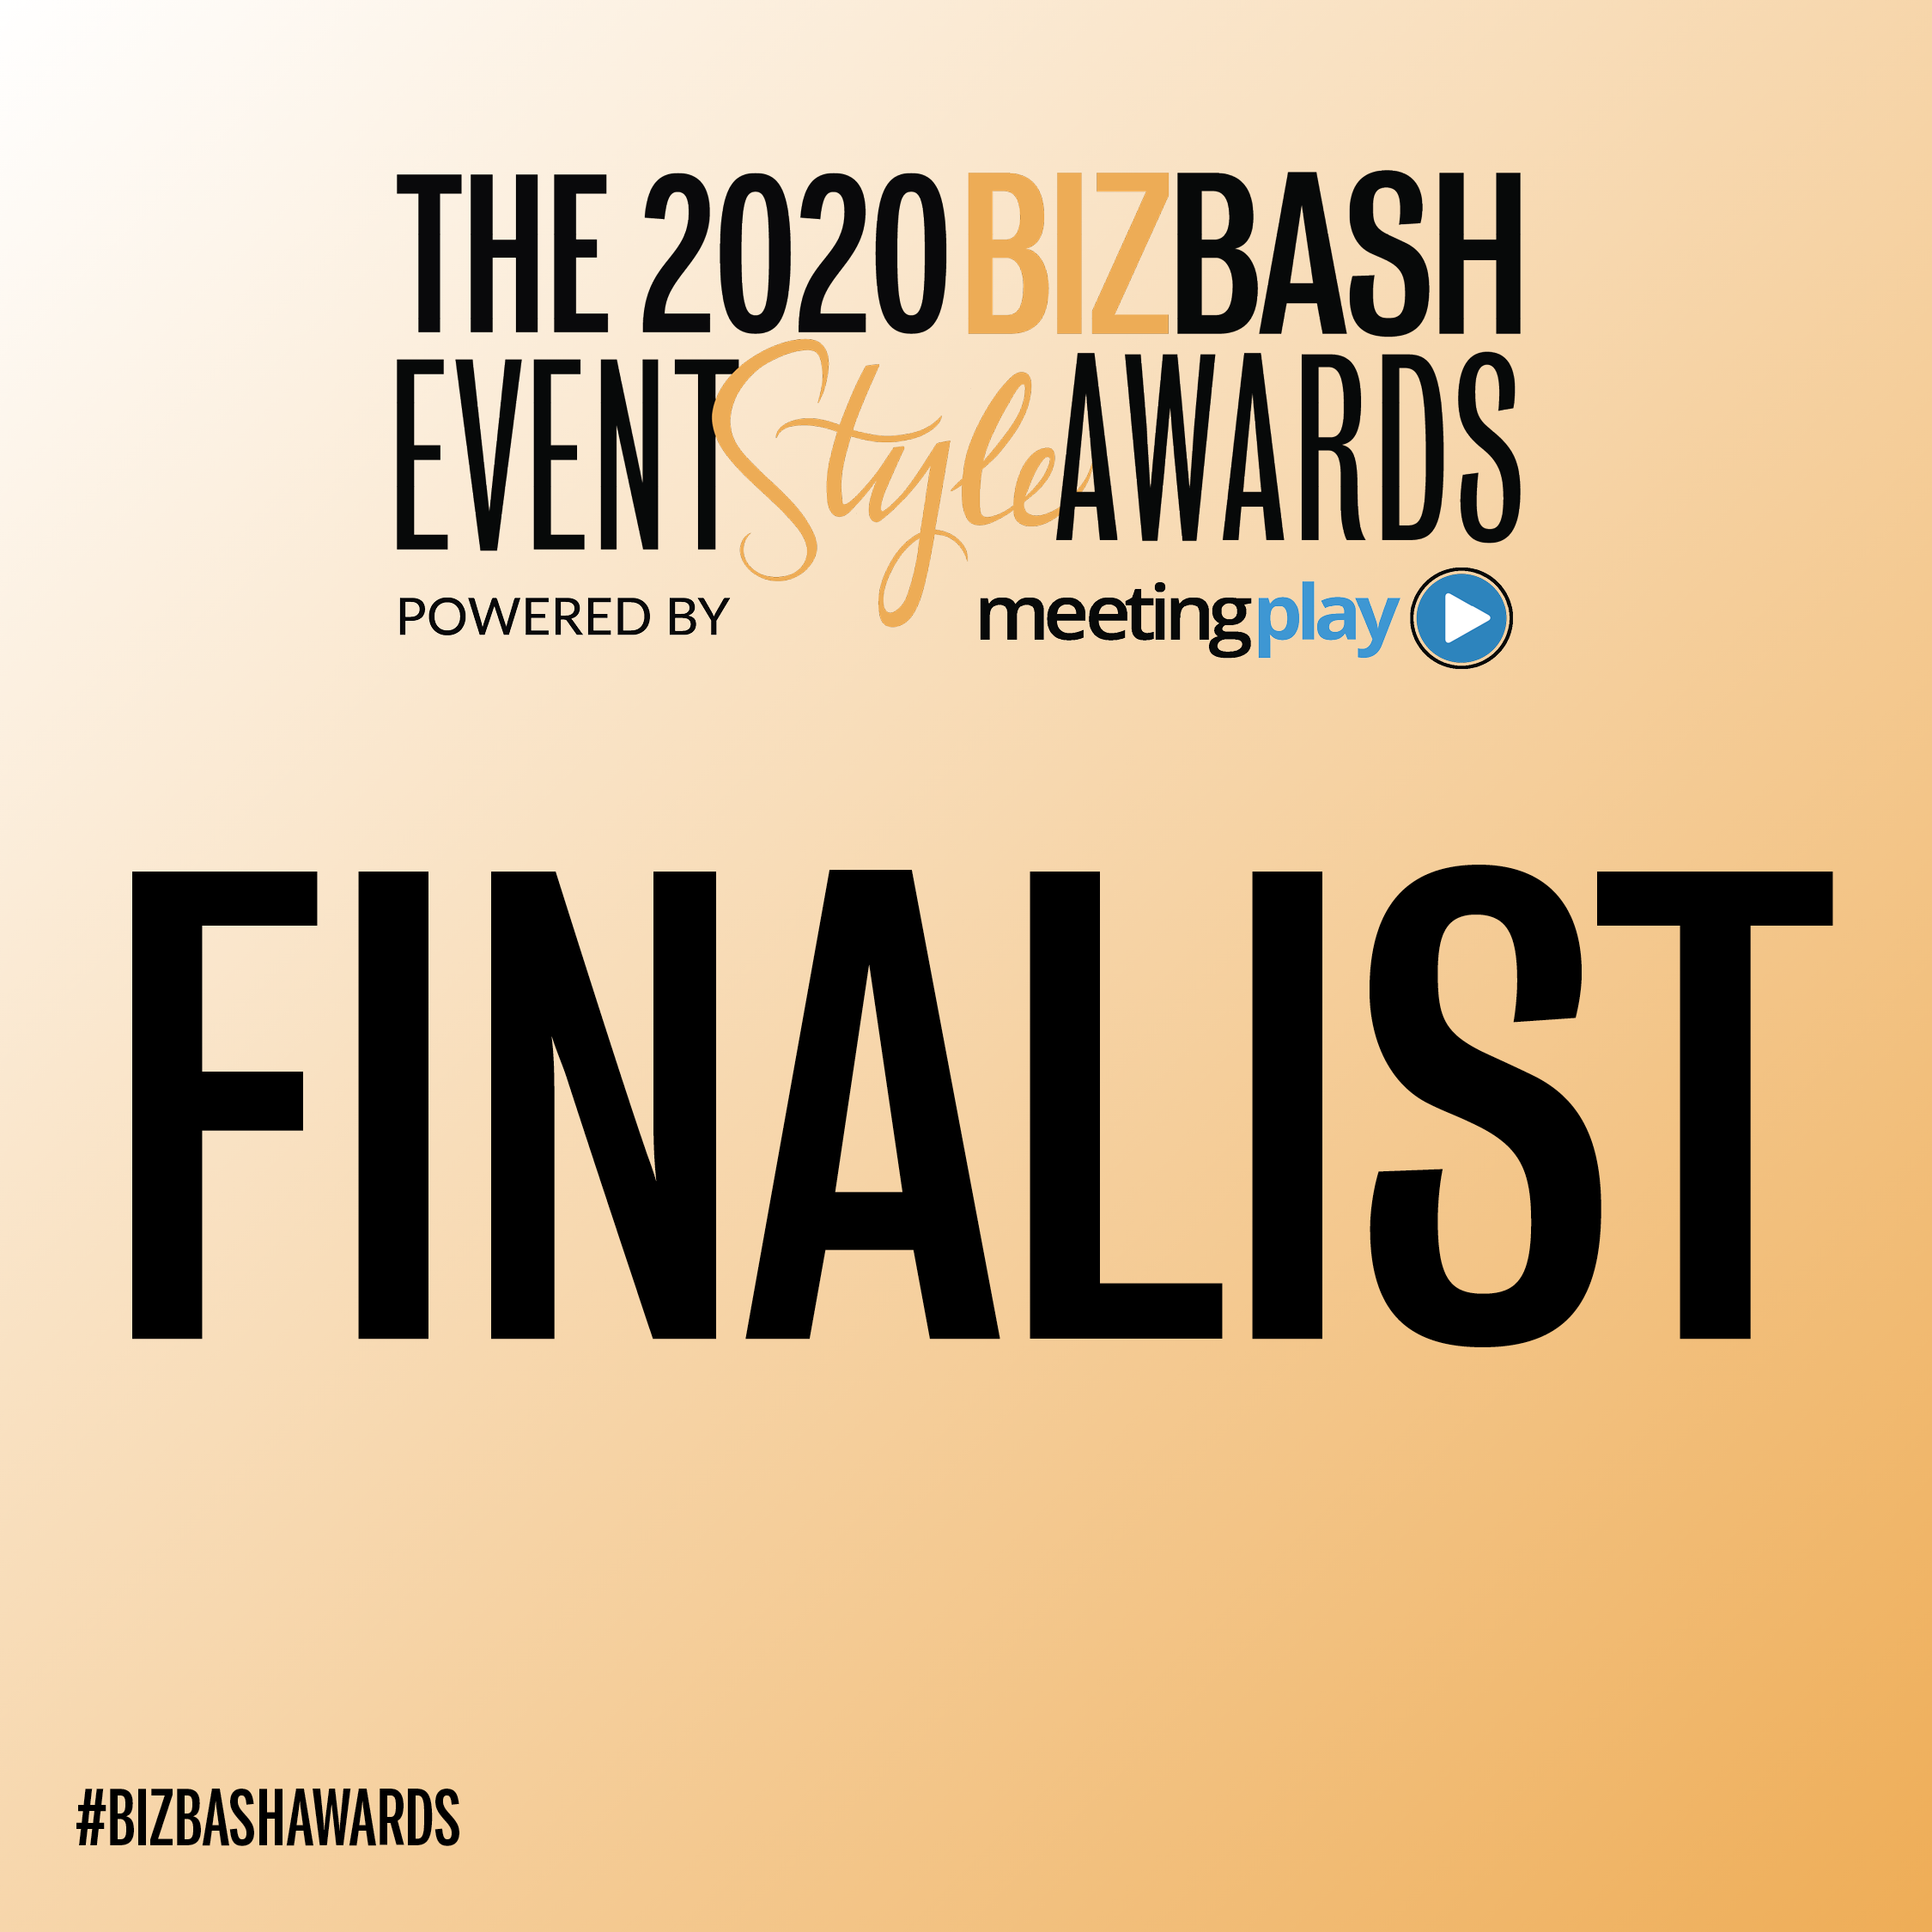 Stylized text on peach colored background reads 'The 2020 Bizbash Event Style Awards powered by MeetingPlay Finalist #bizbashawards'